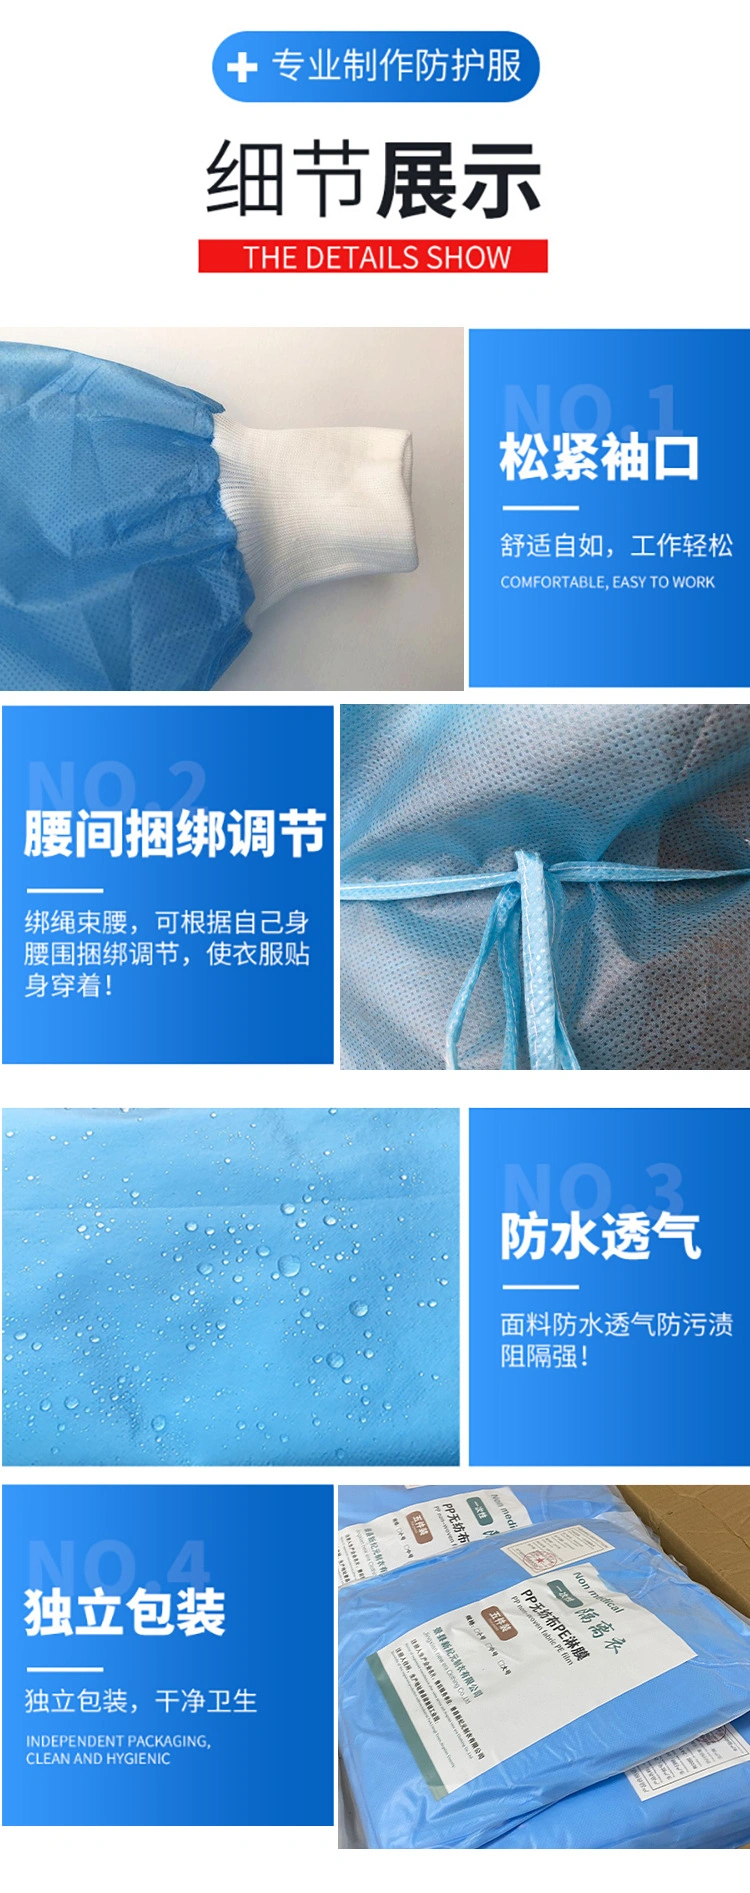 Durable Non-Woven Fabric Protective Clothing with Hood Personal Protection Factory Direct Sale